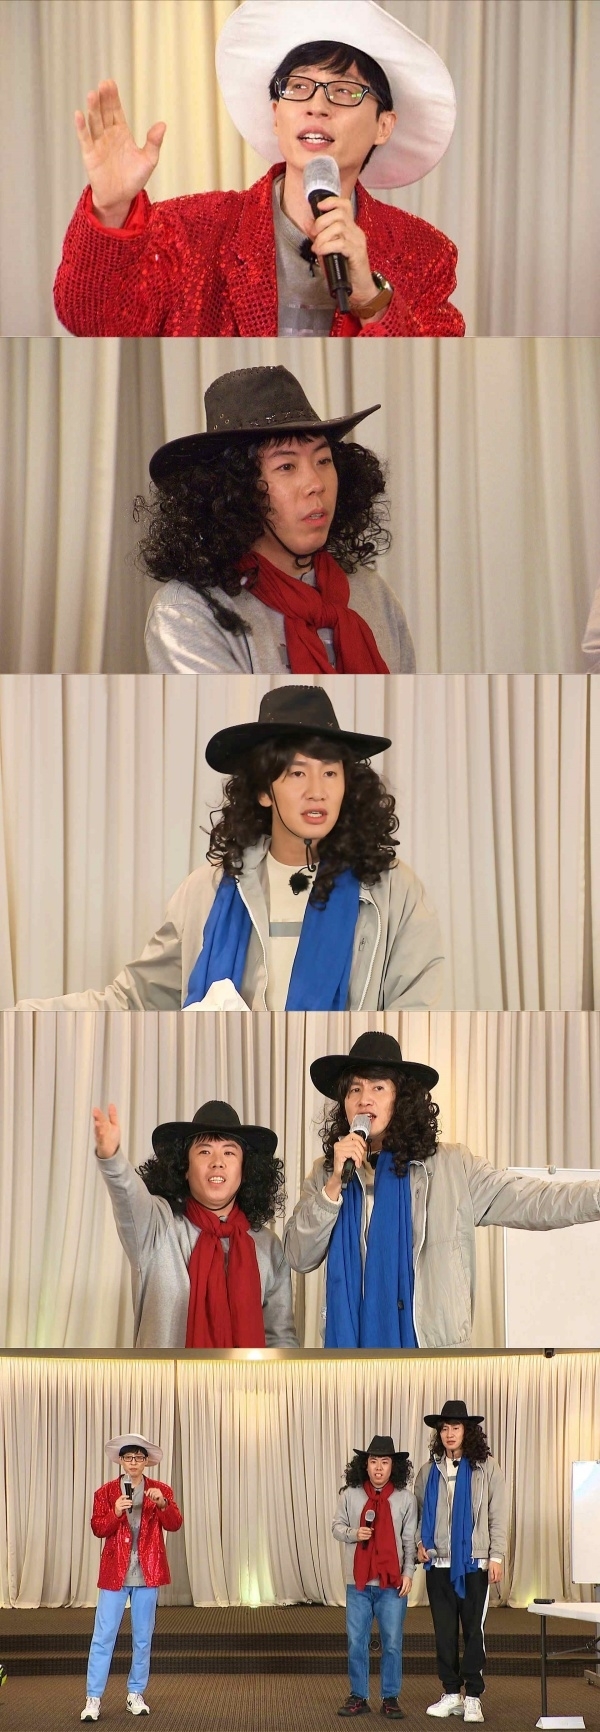 The Running Man Heritage Castle is summoned.On the SBS entertainment program Running Man, which will be broadcast on the 28th, Yang Se-chans Yoo Jae-Suk Dissong, which made Yoo Jae-Suk angry, will be released.The recent recording was divided into four representatives of entertainment agencies and six entertainers, and it was decorated with a race to wage a contract war, and it was time to boast the personal life of an entertainer belonging to the agency.Among them, Yang Se-chan decided to play The Chorus corner with Lee Kwang-soo, and showed Yoo Jae-Suk dissemination with the lyrics of Redevelopment of Love by improvising Yoo Jae-Suks official assistant Heritage castle.In particular, the three previous collaborations that can not be seen anywhere have attracted great attention with the trailers that were released earlier, adding to the expectation of this broadcast.When the stage began, Yang Se-chan attacked Yoo Jae-Suk as the appearance ranking is the same, and listed ugly reasons such as deformed teeth.Even Yoo Jae-Suks physical defects broke out, and the stage eventually stopped, and Yoo Jae-Suk was angry that I will prepare a lawsuit! And I can not act in the future!On the other hand, Jesse, who was a guest on the day, presented a new song What X stage, 2PM Wooyoung set up an atmosphere with random music dance, and Song Ji-hyo presented a variety of attractions by showing his unique personal period proving his luck as Gold Son Ji Hyo.